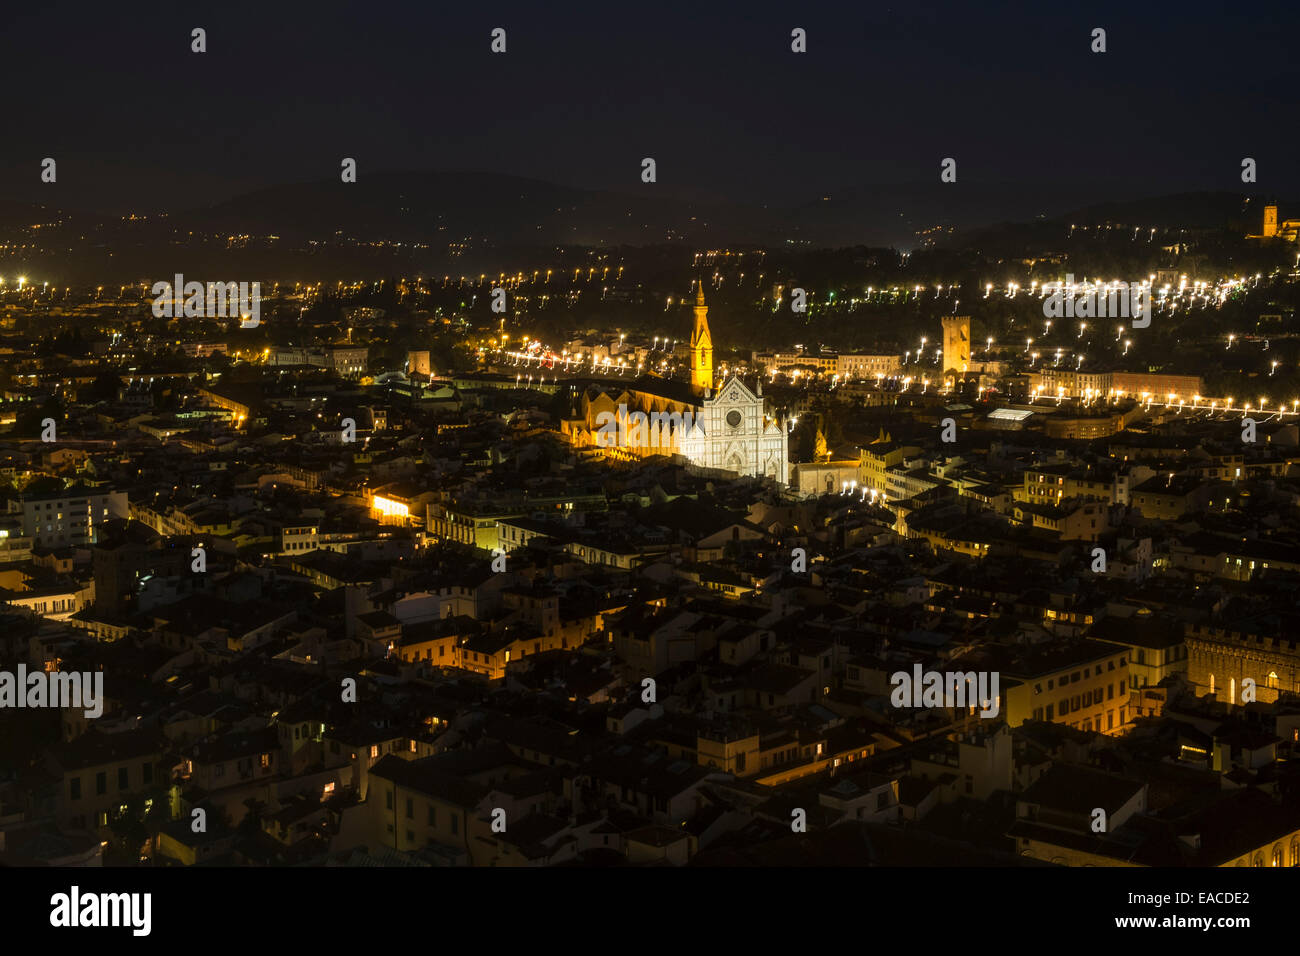 A view over Florence at night from the Duomo's public viewing platform Stock Photo